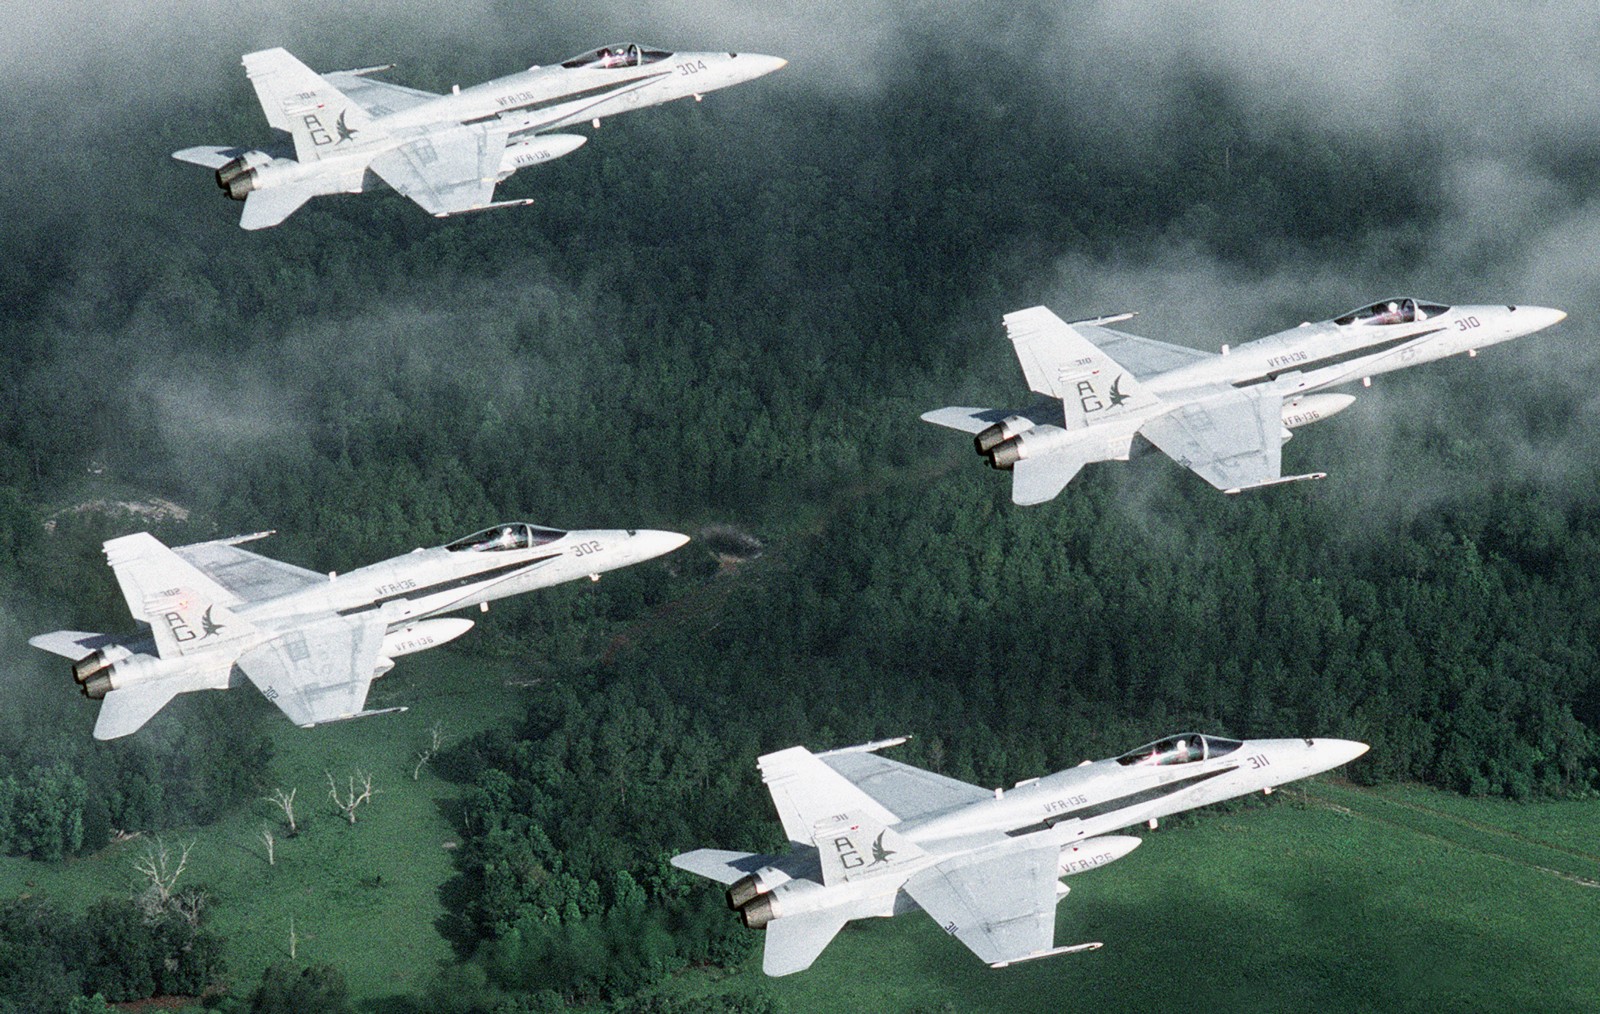 vfa-136 knighthawks strike fighter squadron f/a-18c hornet 1992 87 cvw-7 carrier air wing